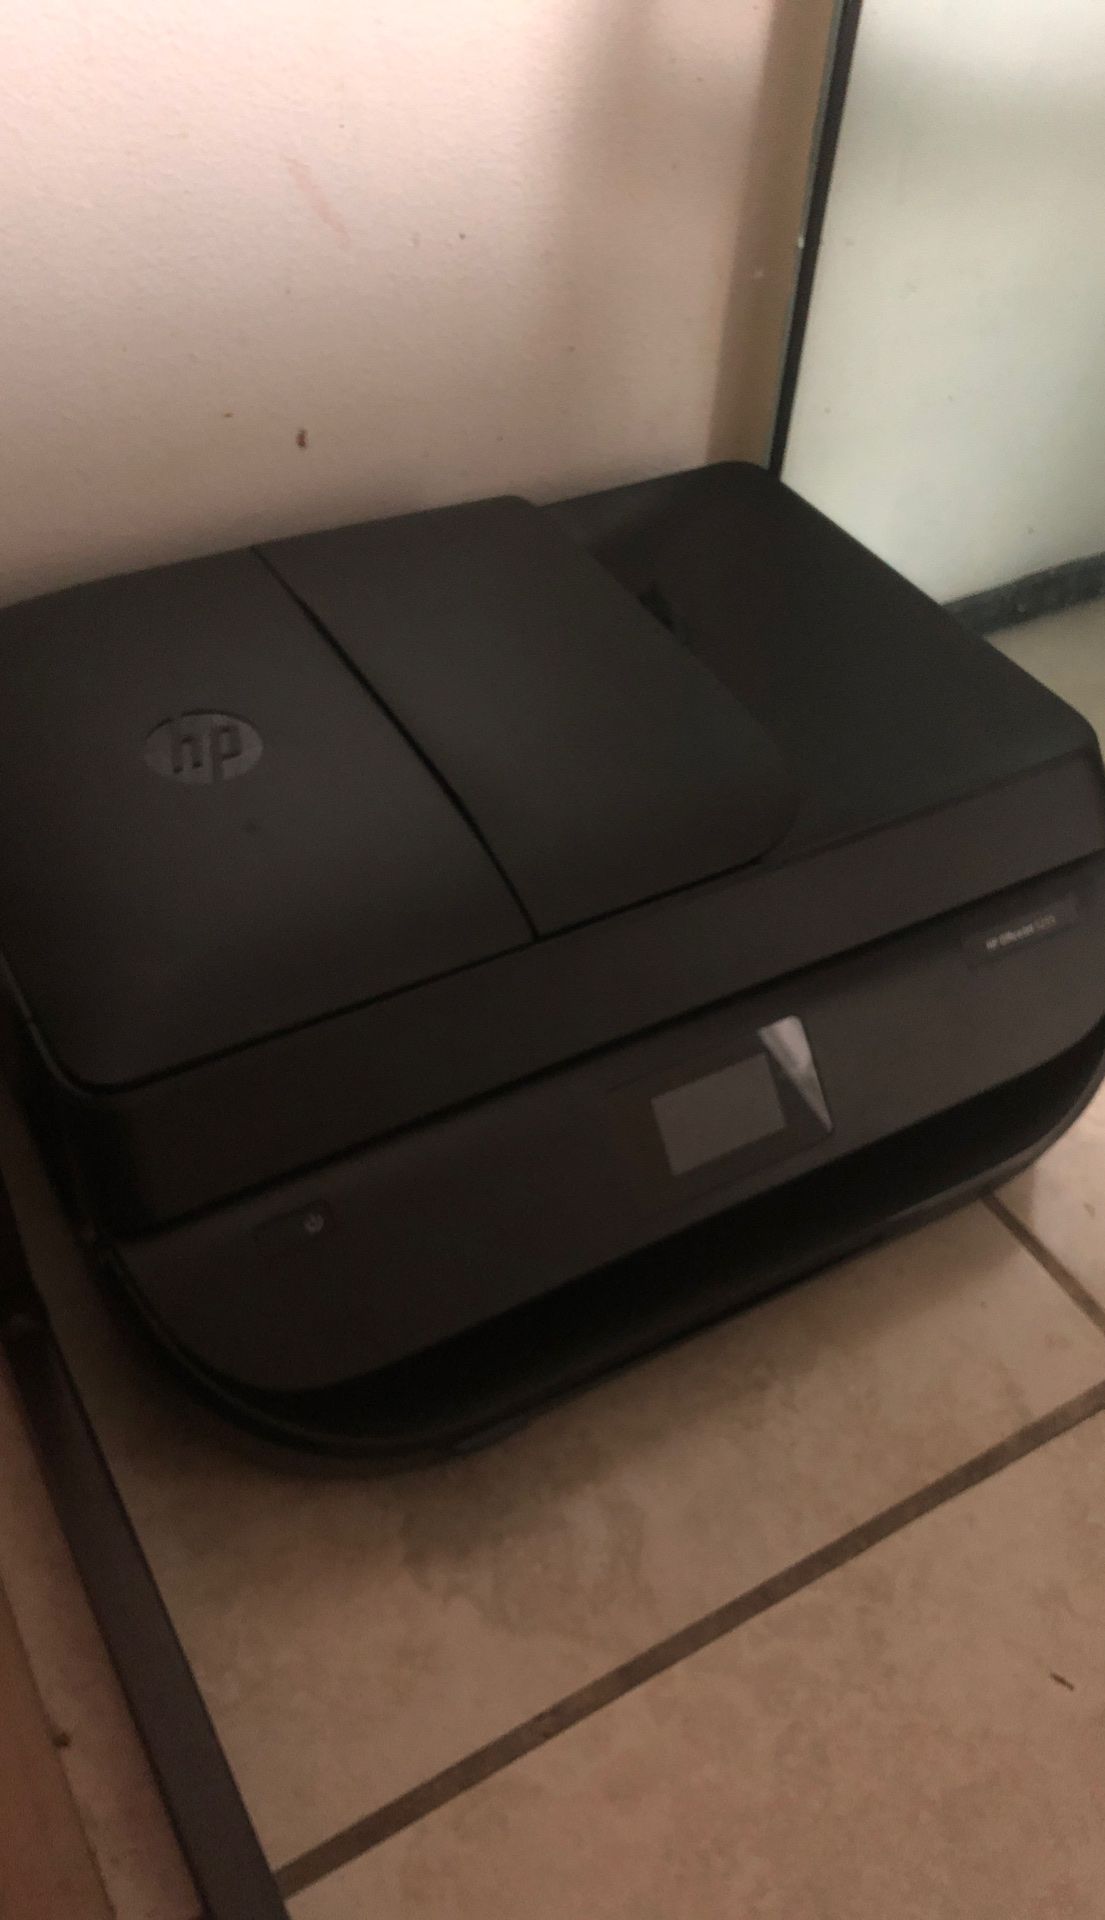 All-in-one HP OfficeJet 5255 printer